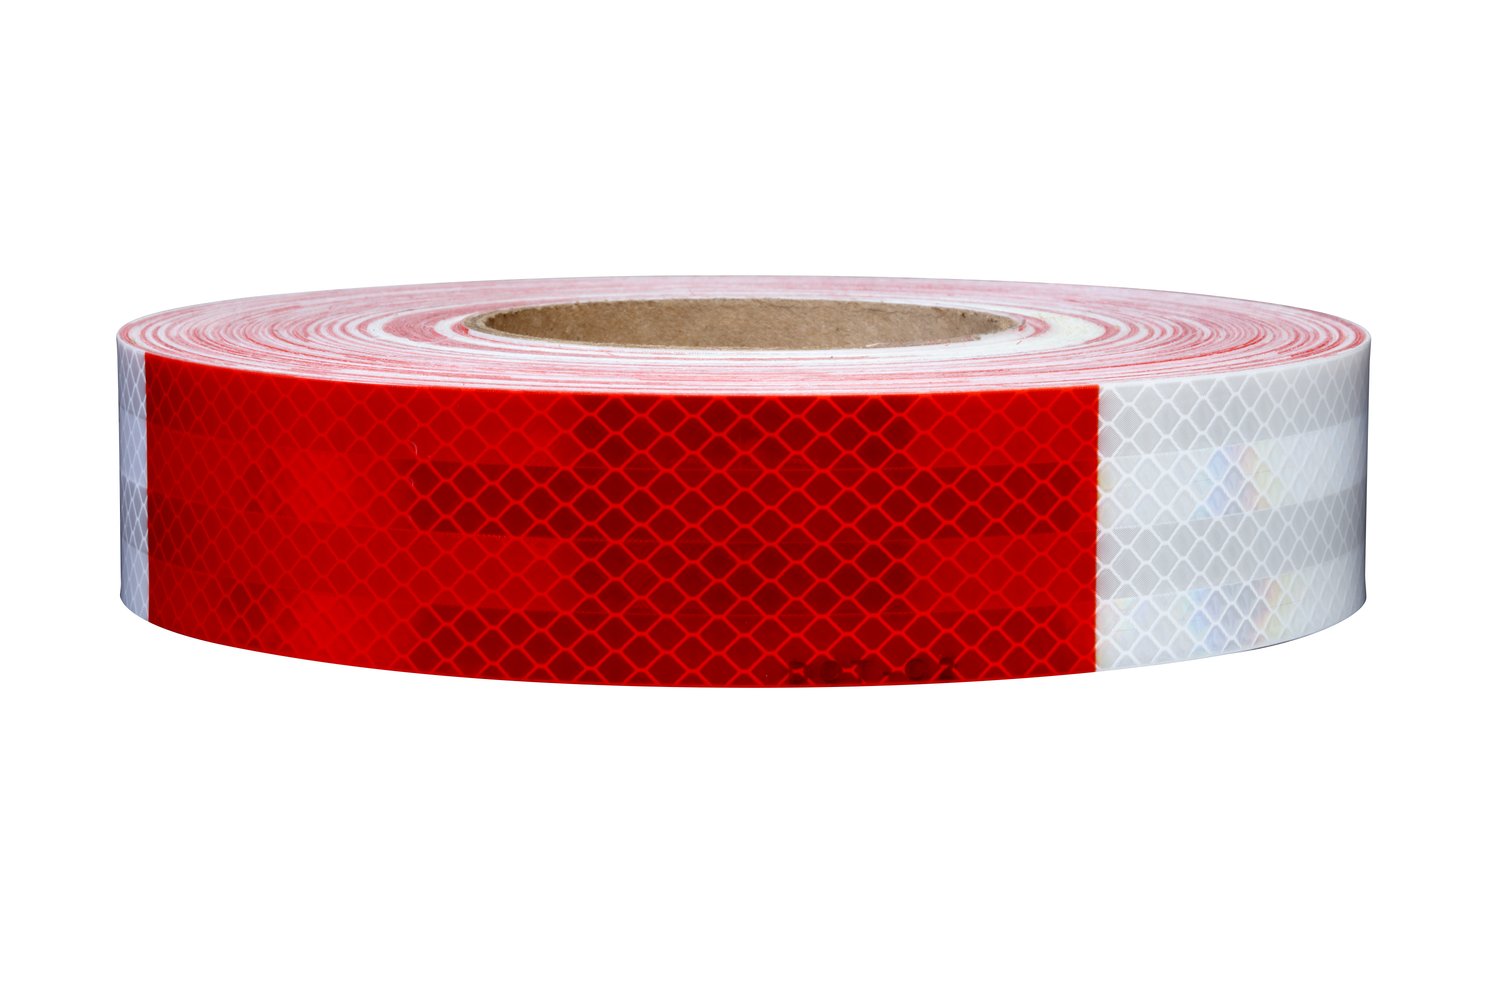 7100139510 - 3M Diamond Grade Conspicuity Markings 983-326, Red/White, Adhesive
Coated, Linered, 1 ½ in x 150 ft